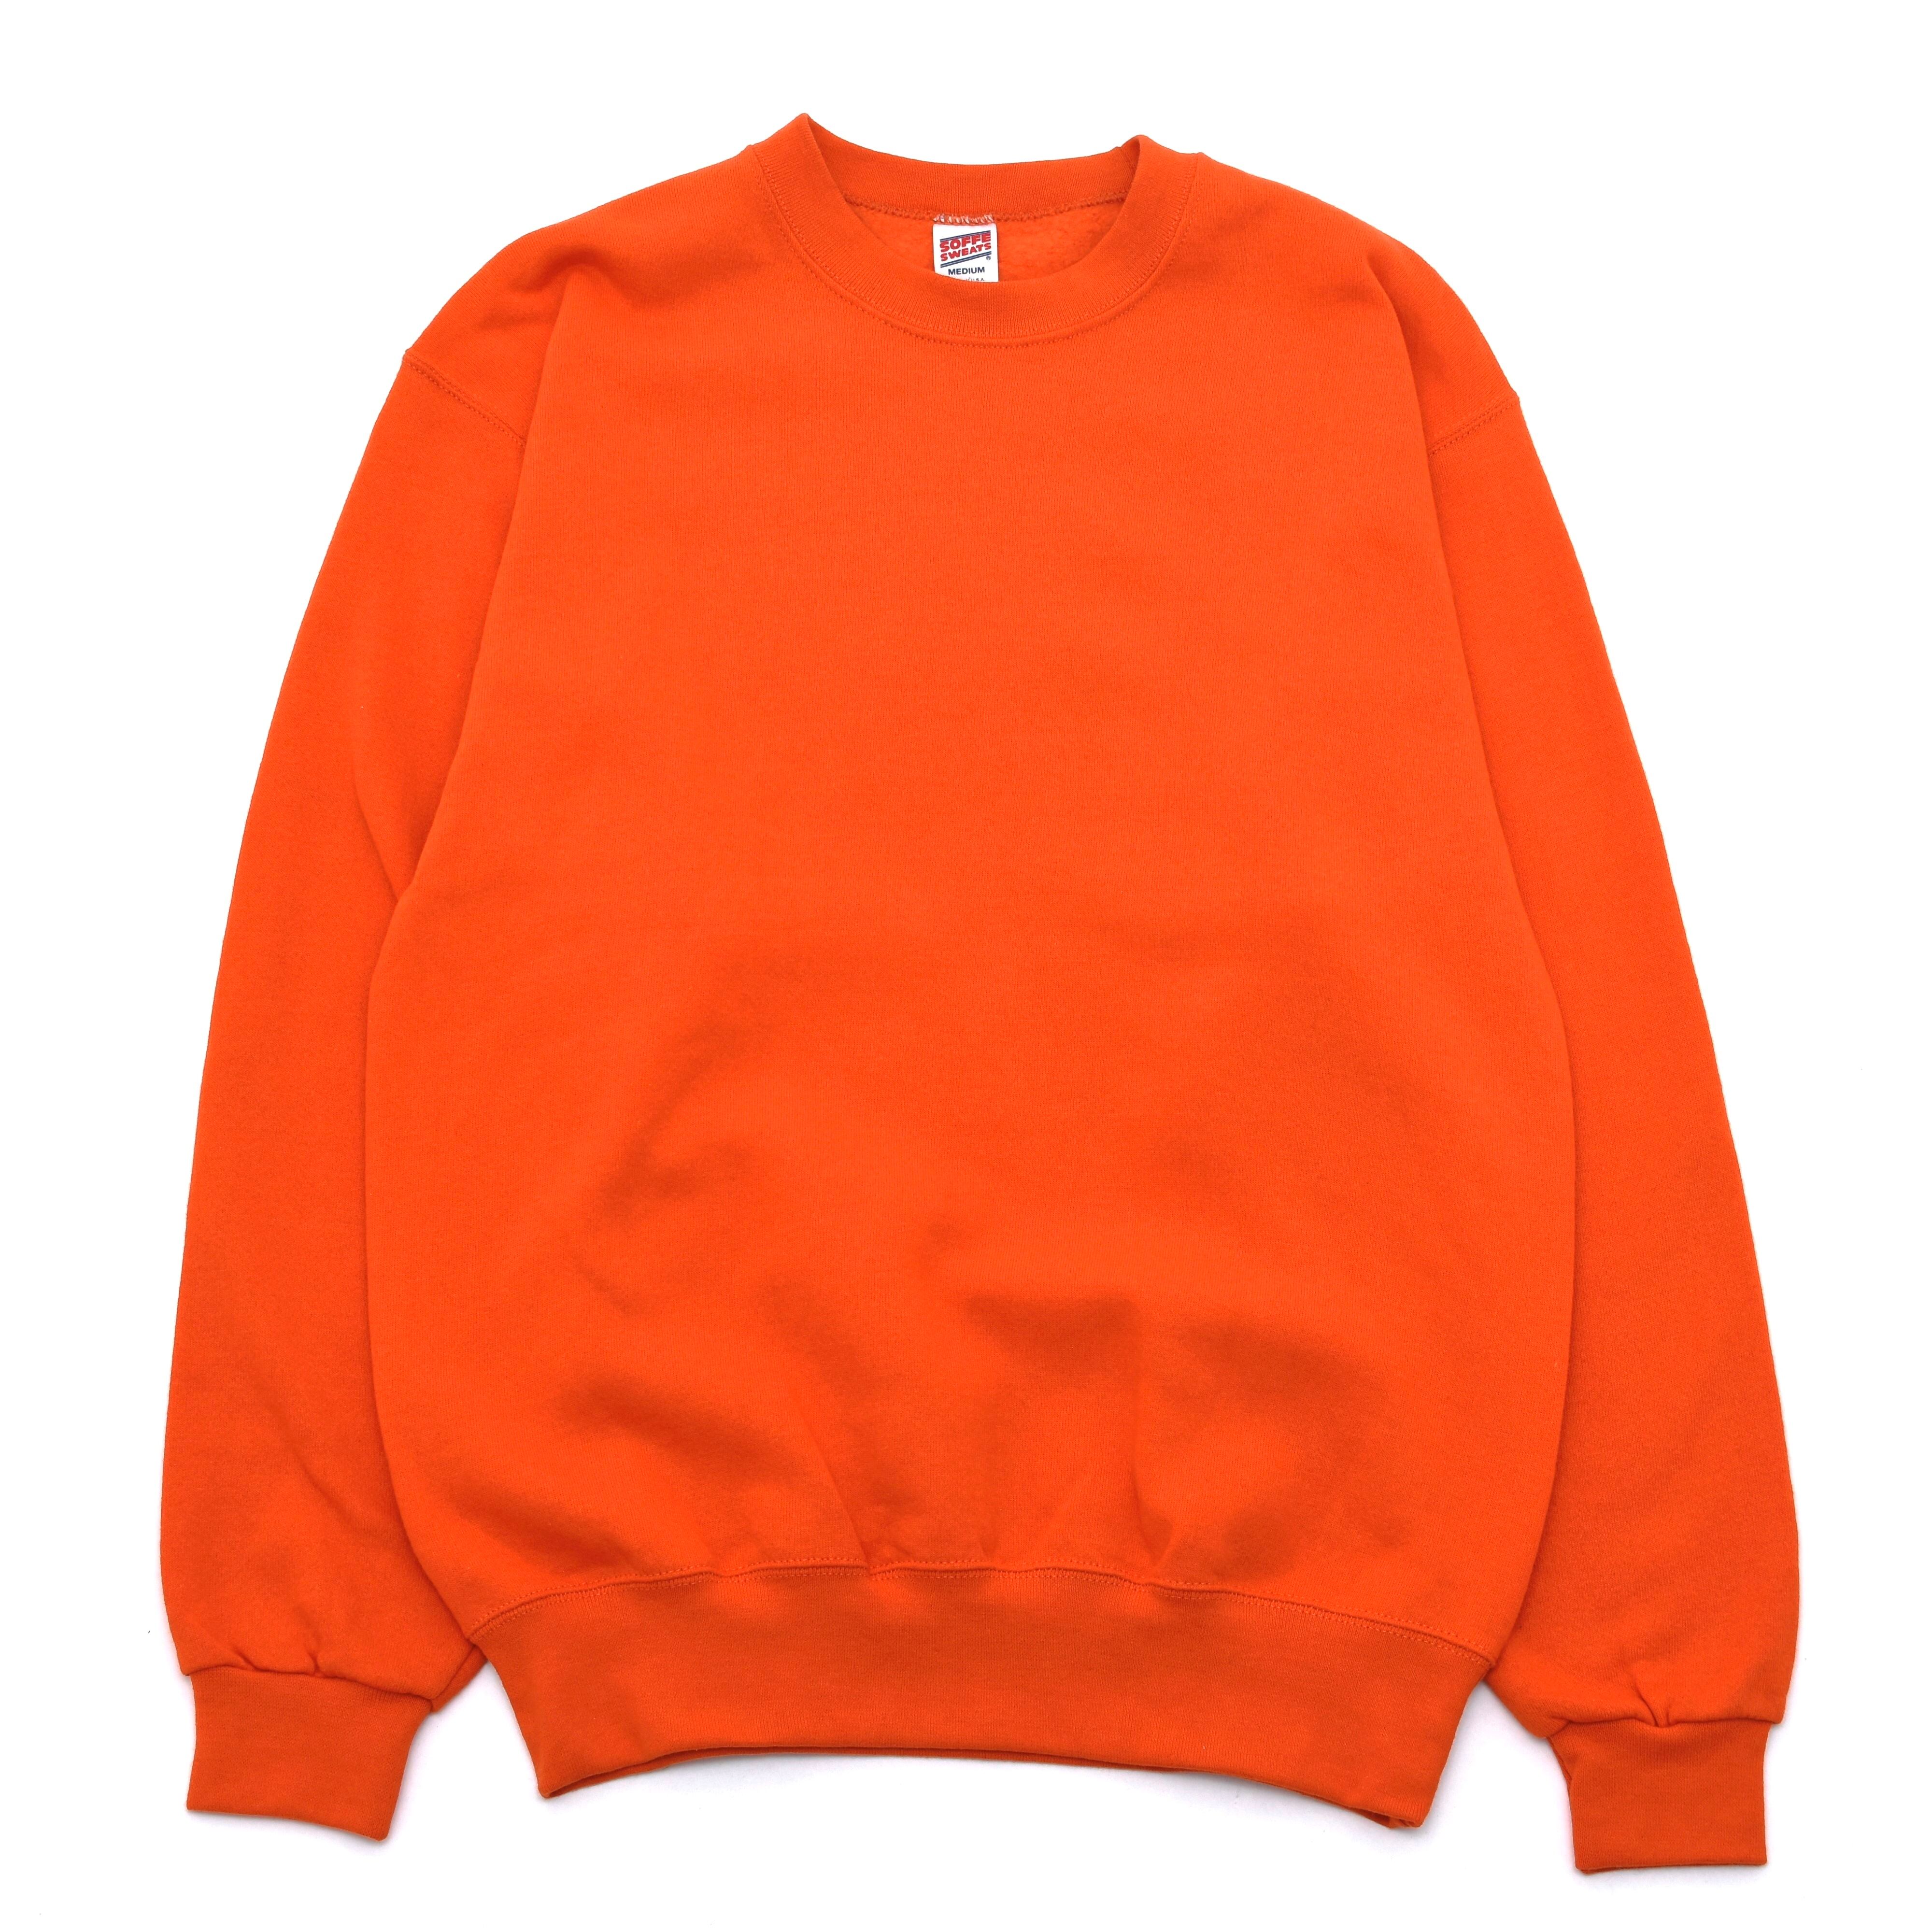 Dead stock SOFFE color sweatshirt Made in USA